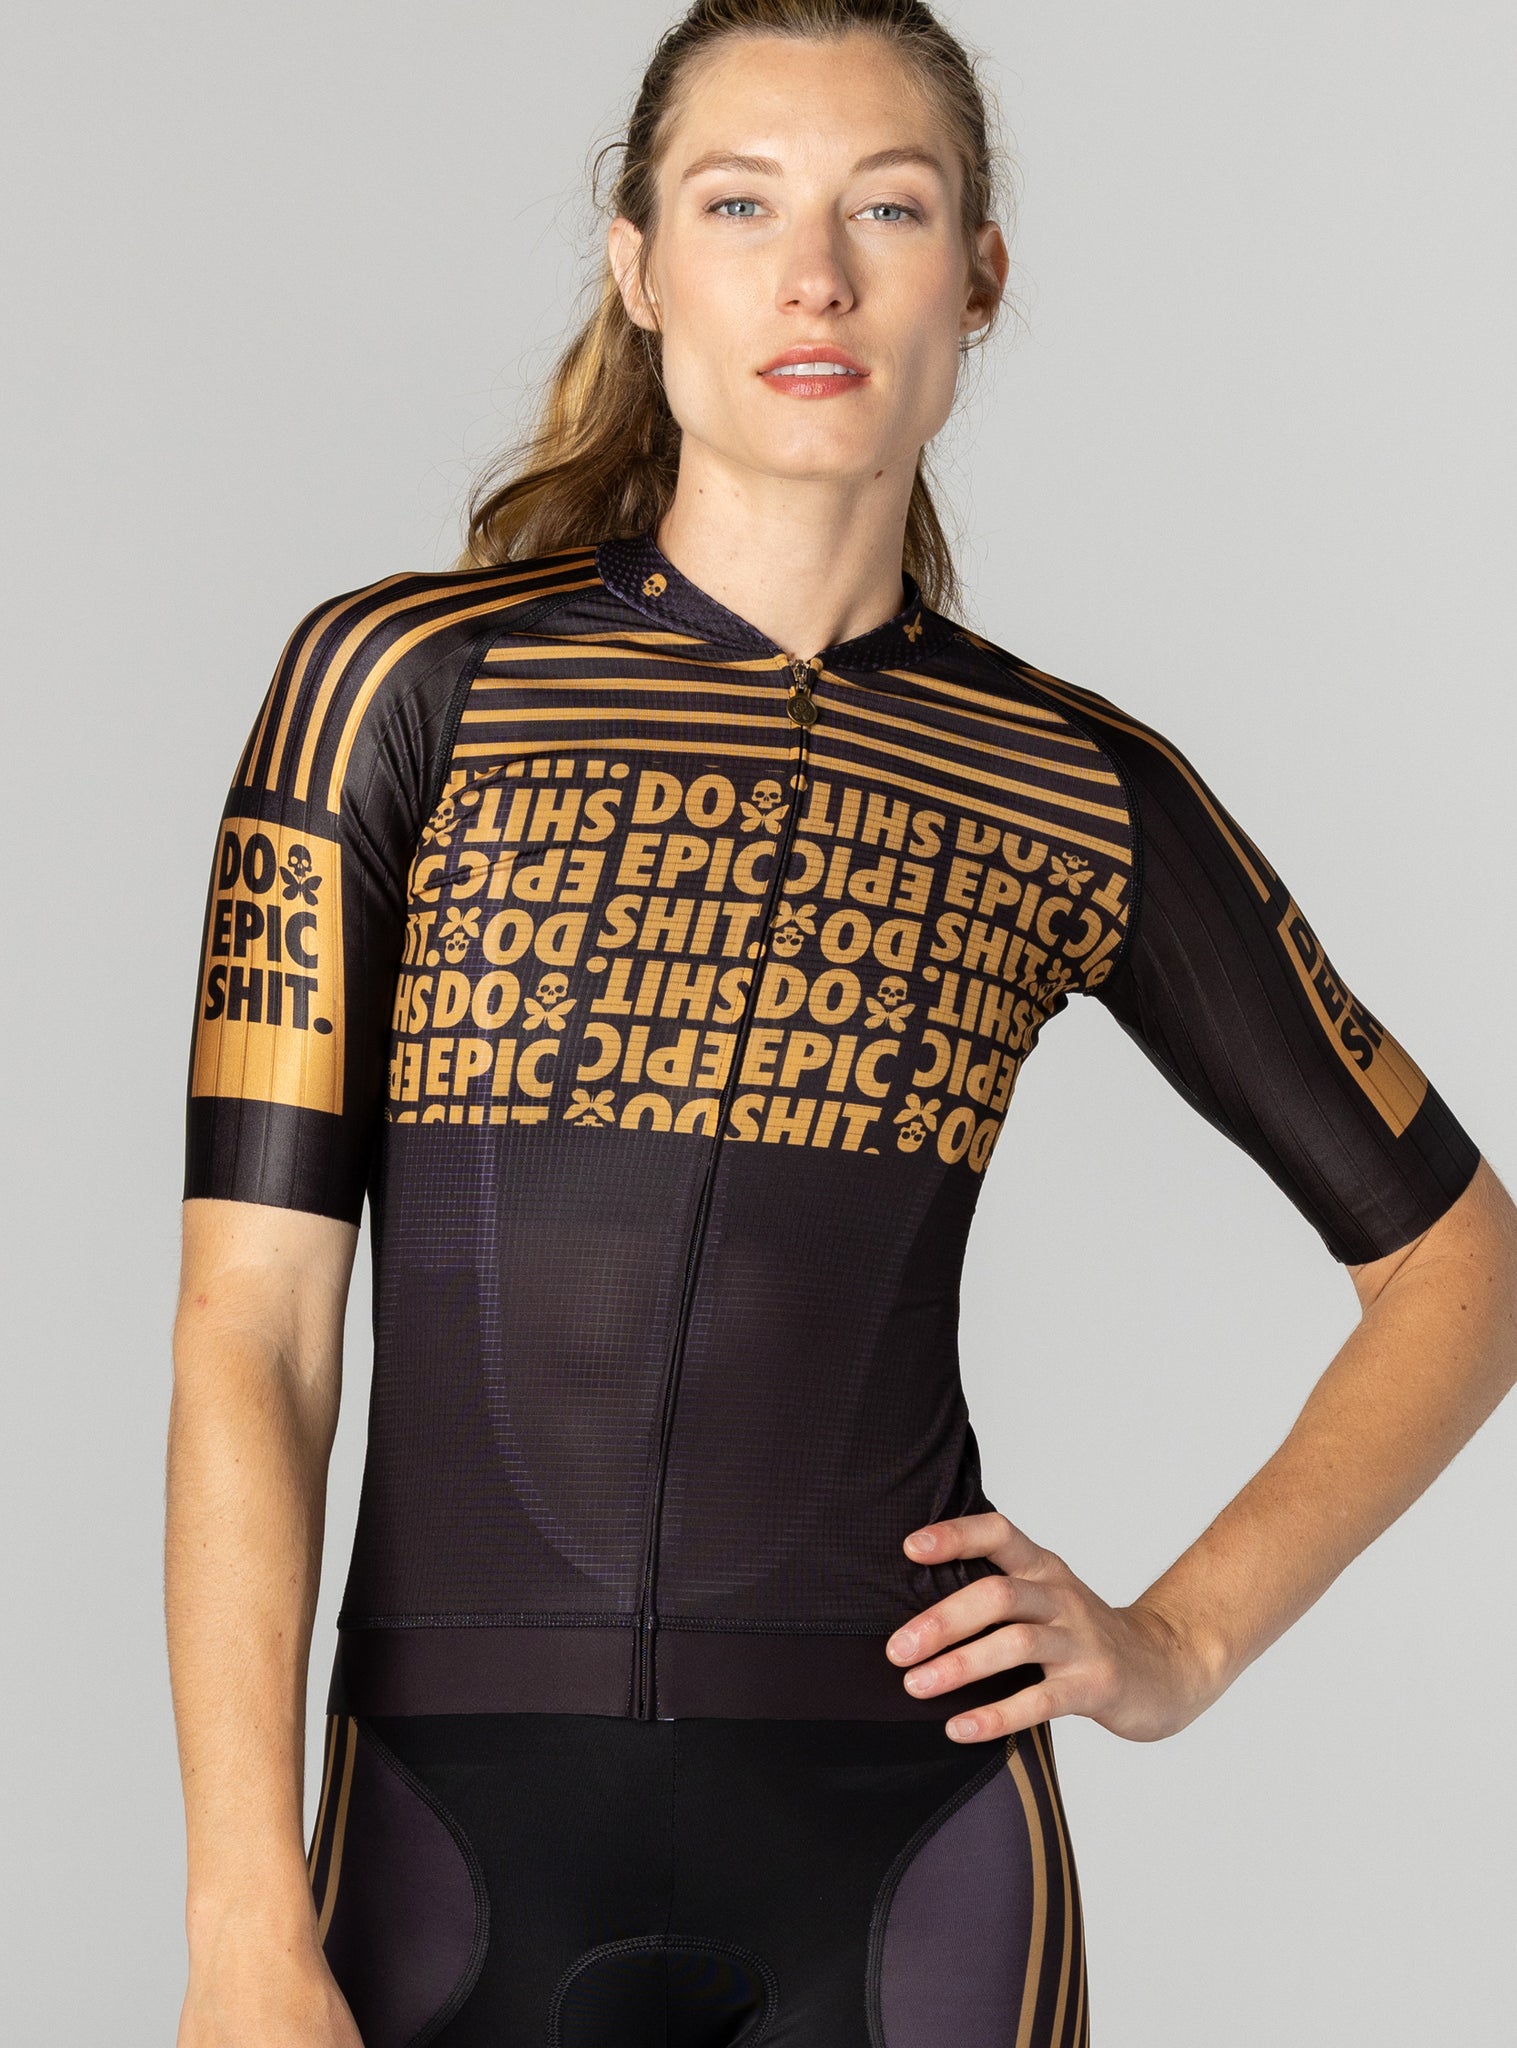 betty designs do epic shit cycle jersey for women